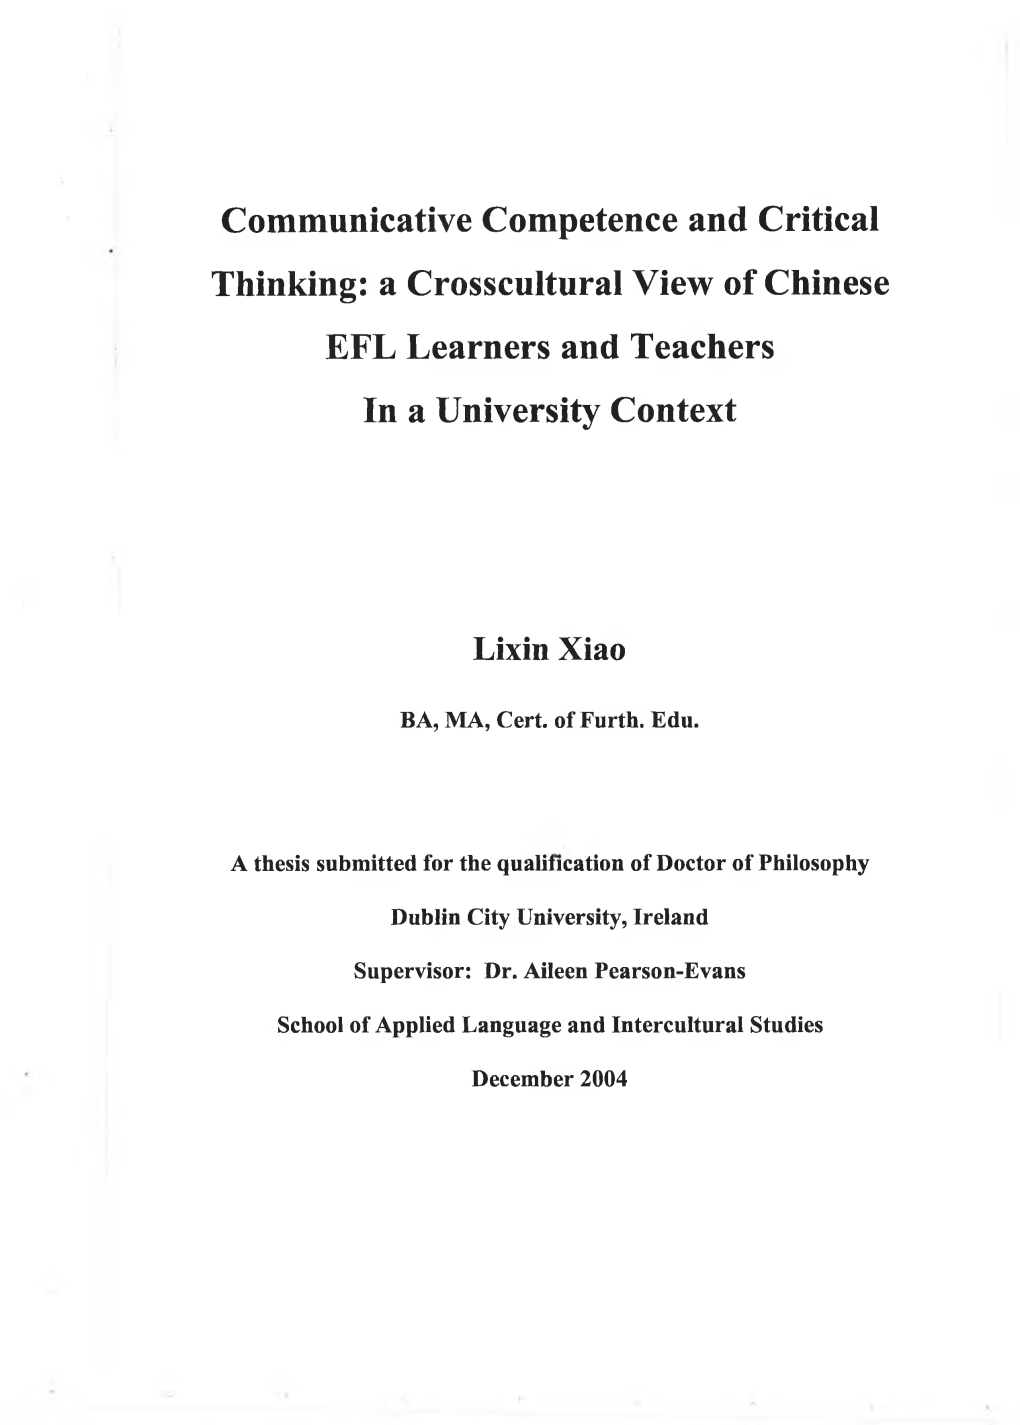 Communicative Competence and Critical Thinking: a Crosscultural View of Chinese EFL Learners and Teachers in a University Context